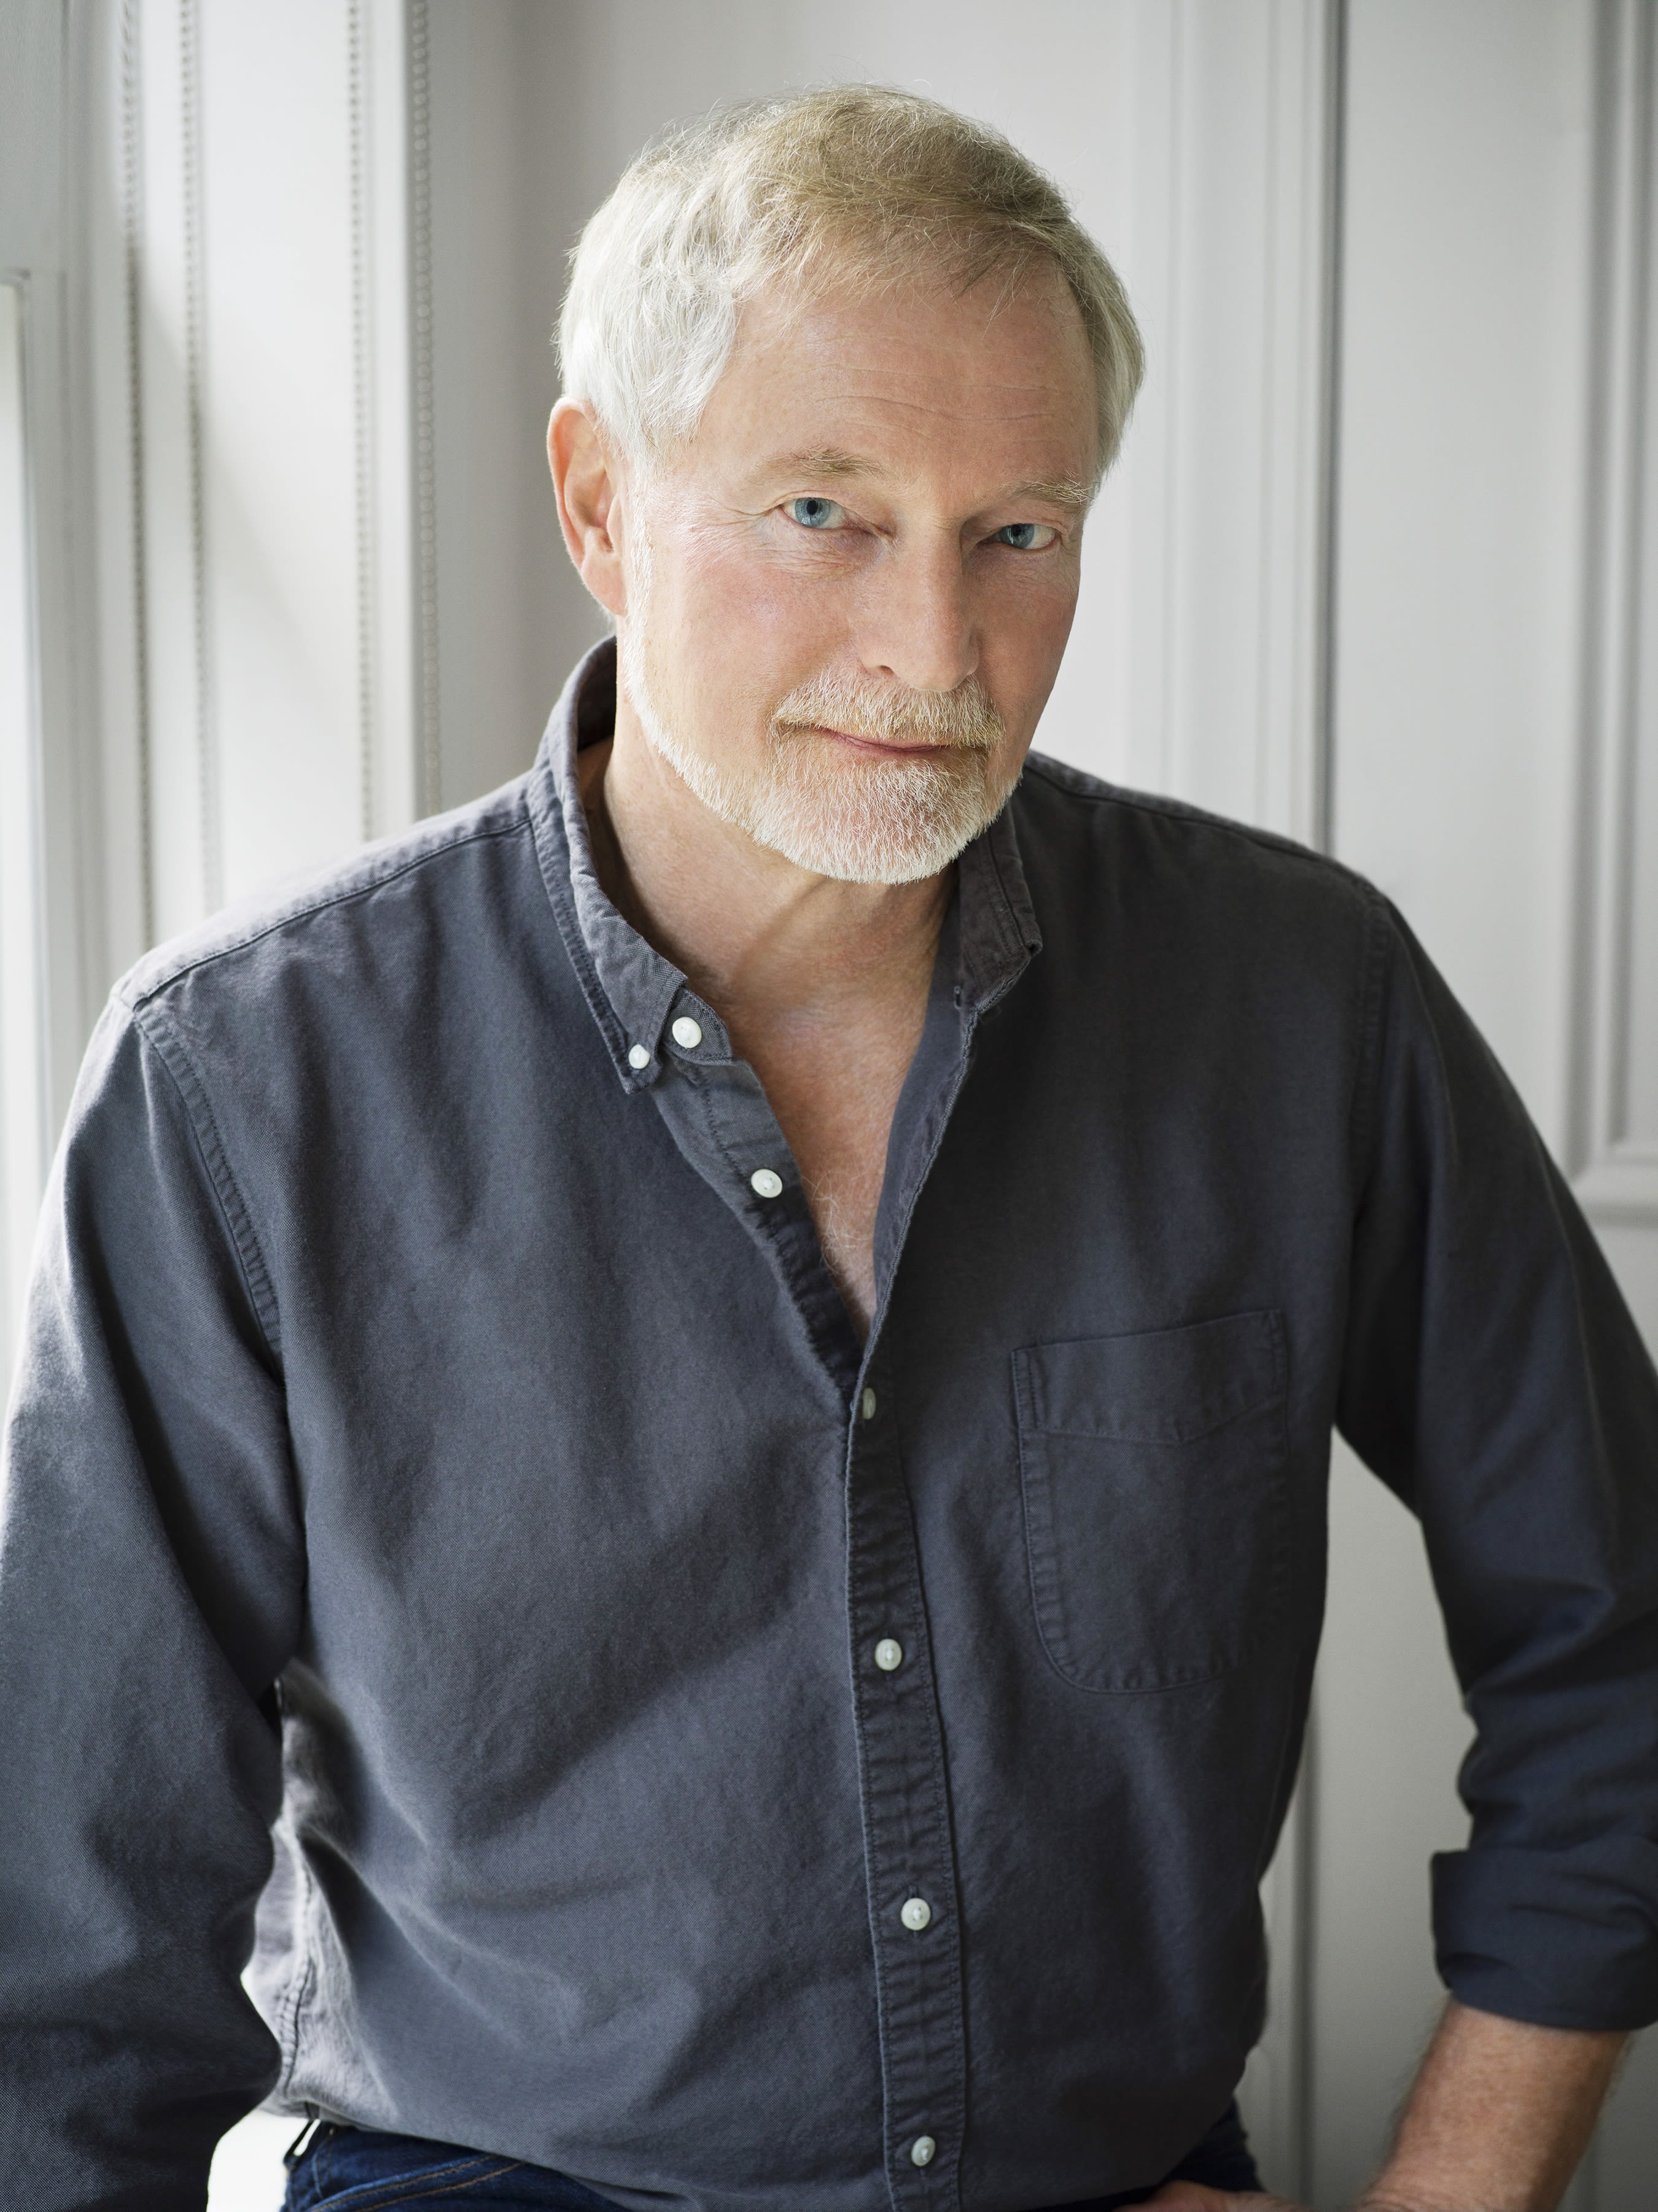 An Evening With Author Erik Larson and More Programs in May